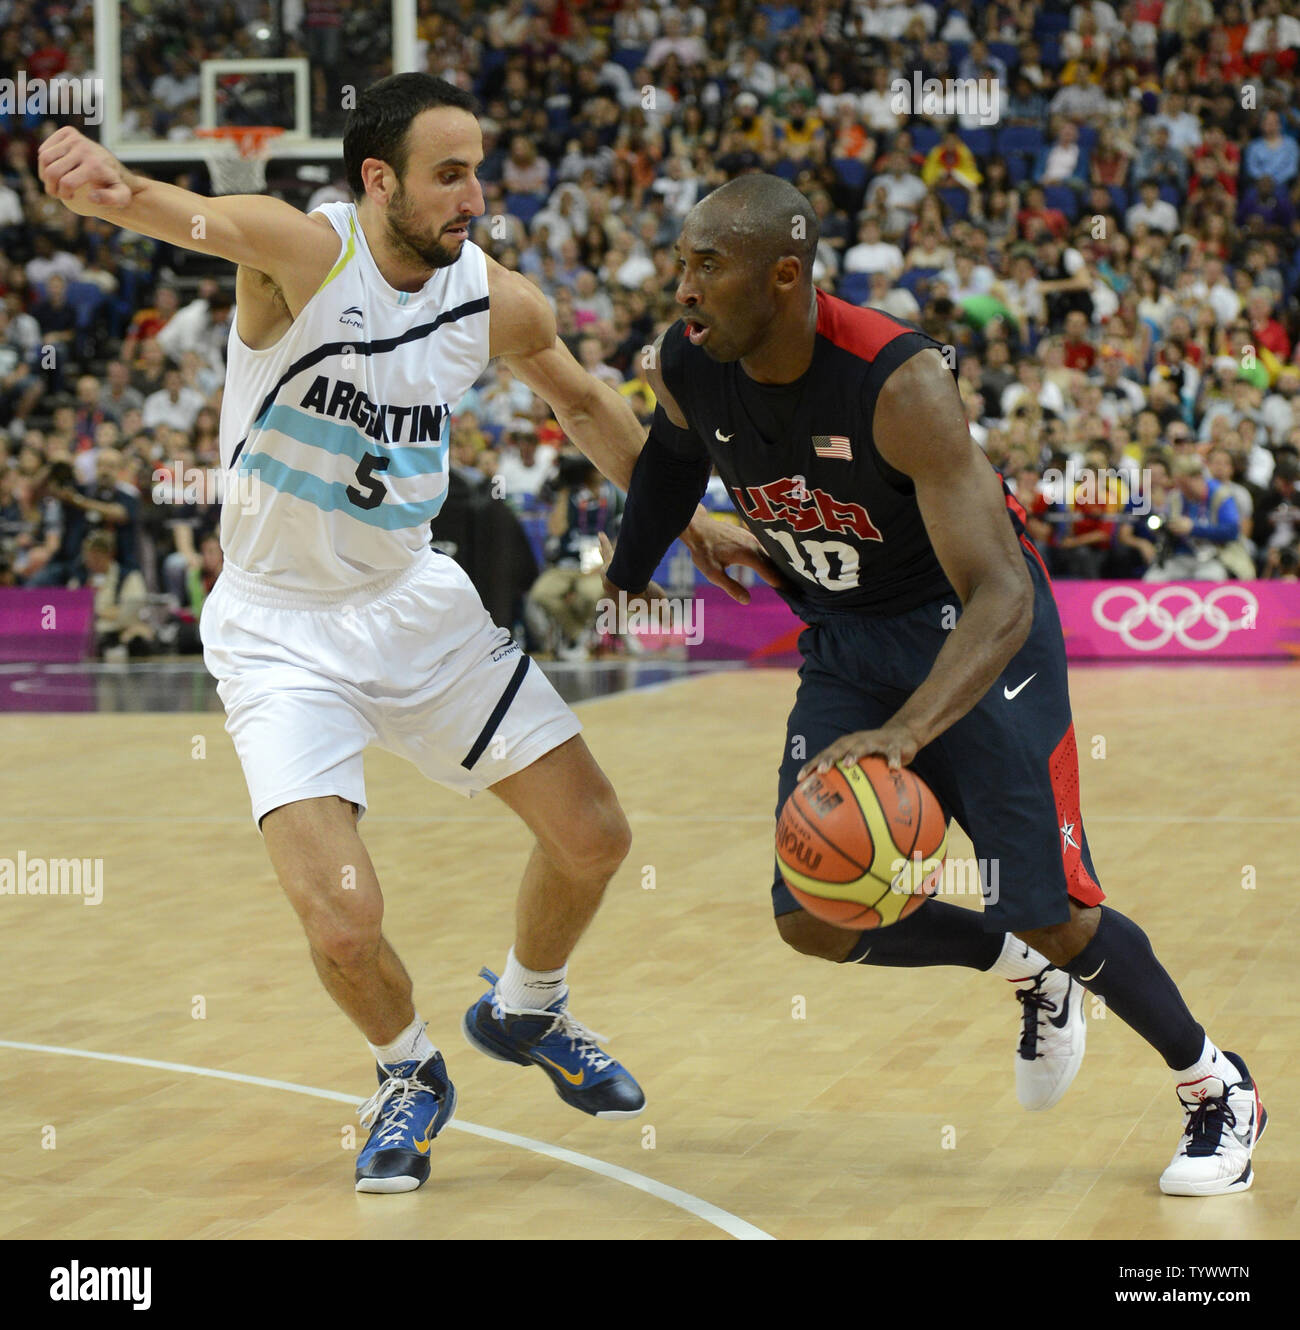 SUMMER OLYMPICS: Kobe Bryant drains six 3-pointers in second half